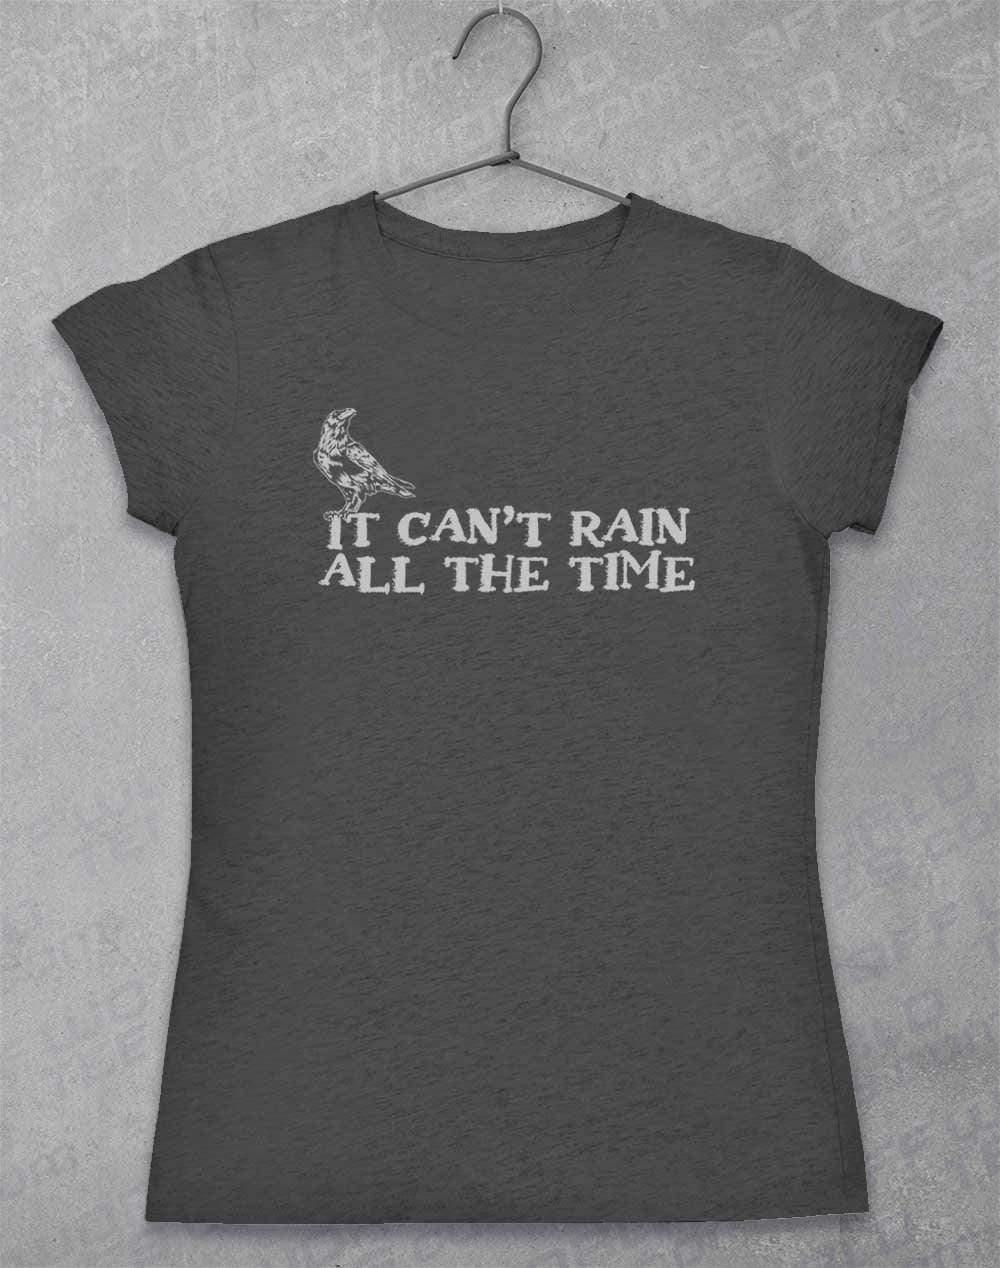 It Can't Rain All the Time Womens T-Shirt 8-10 / Dark Heather  - Off World Tees